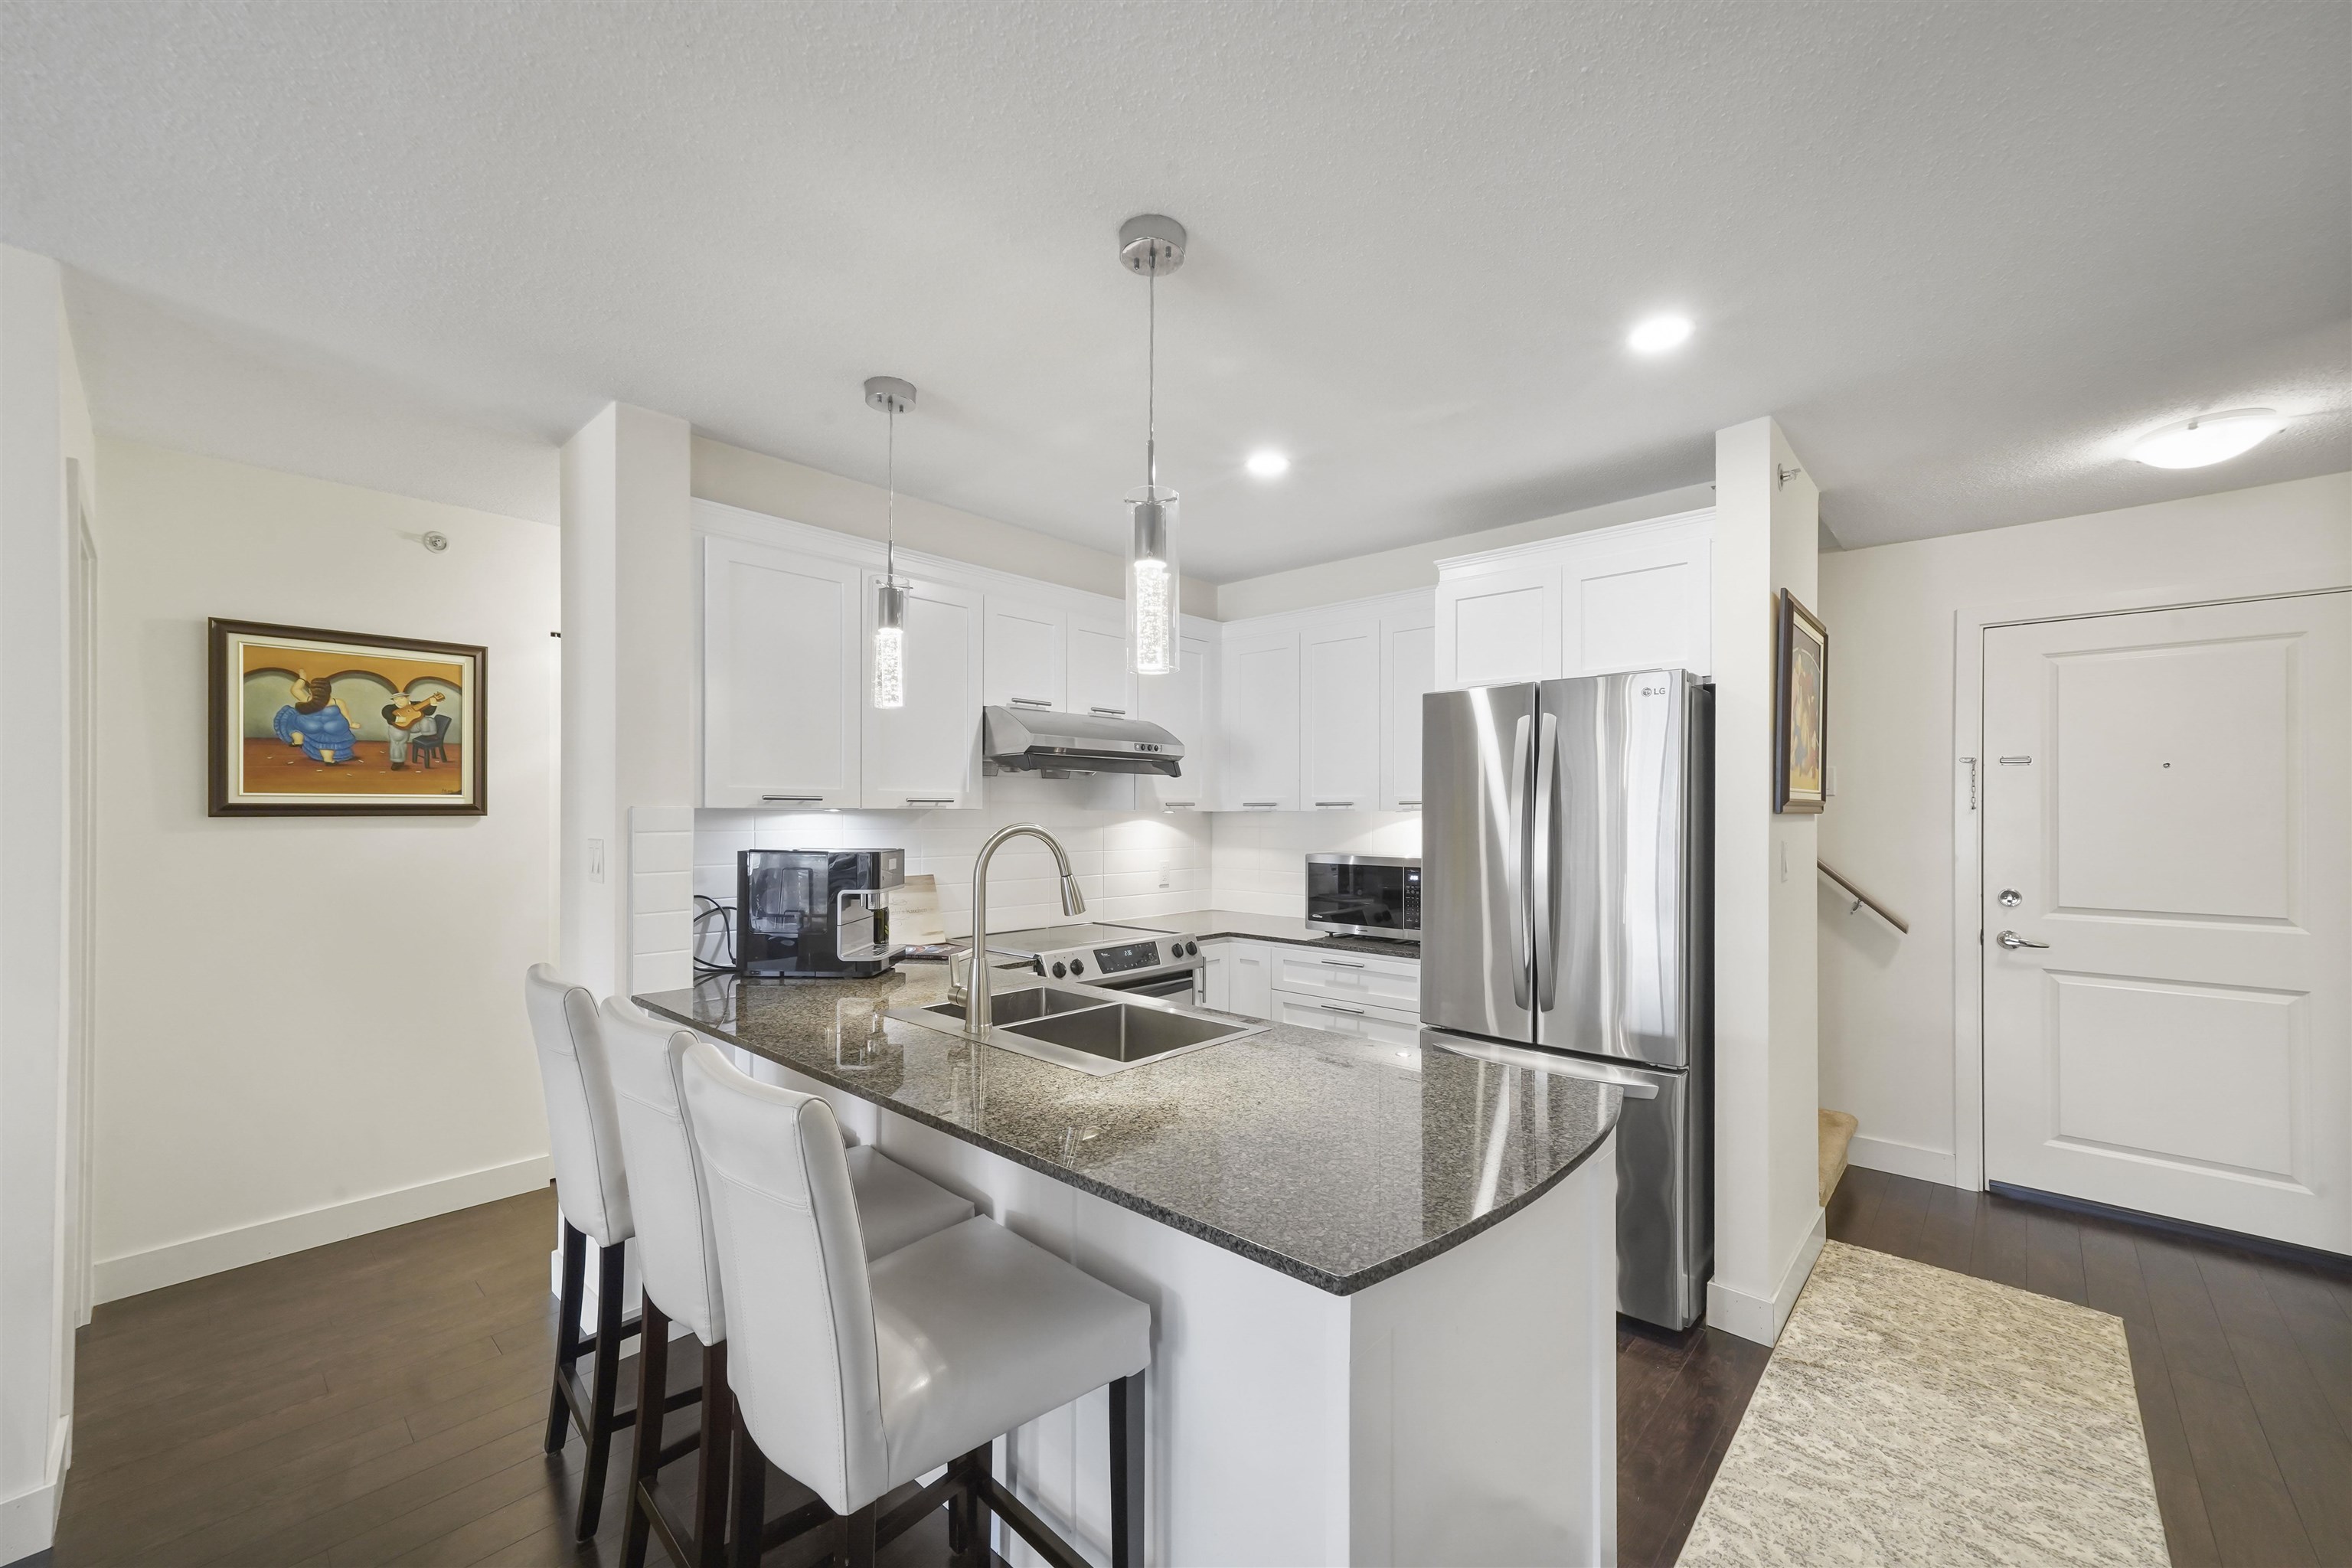 North Meadows PI Apartment/Condo for sale:  2 bedroom 1,181 sq.ft. (Listed 2022-11-25)